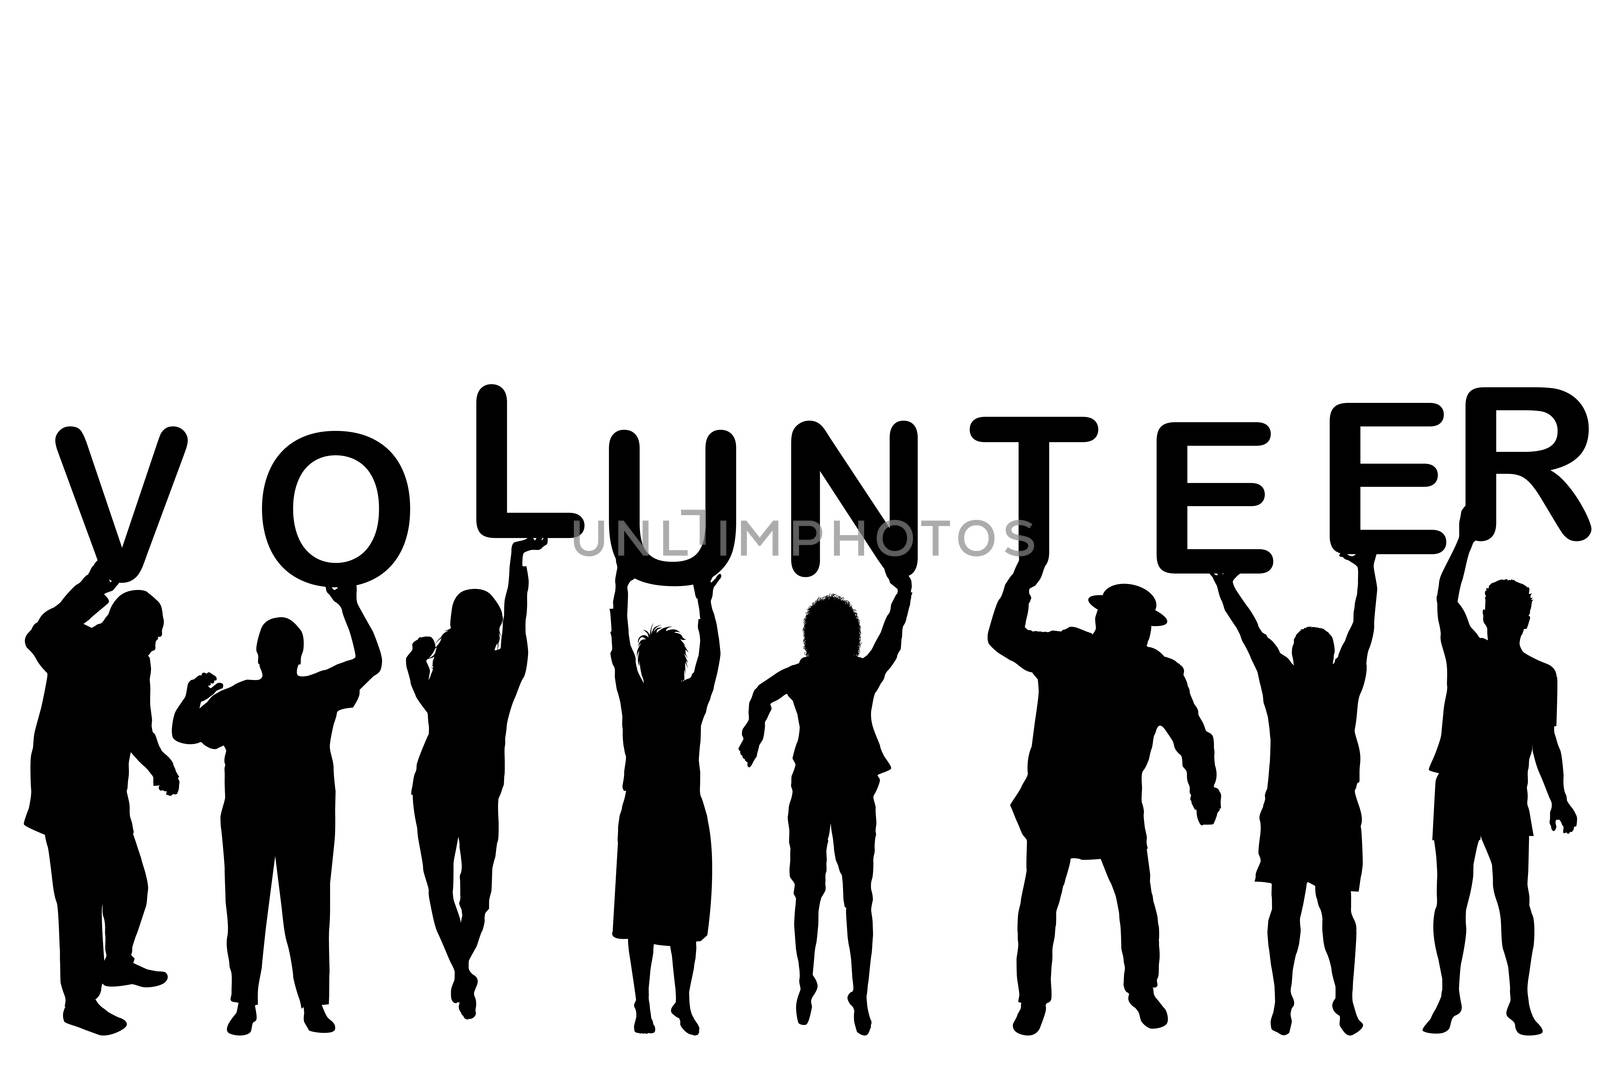 Volunteer concept with people silhouettes holding letters with word VOLUNTEER